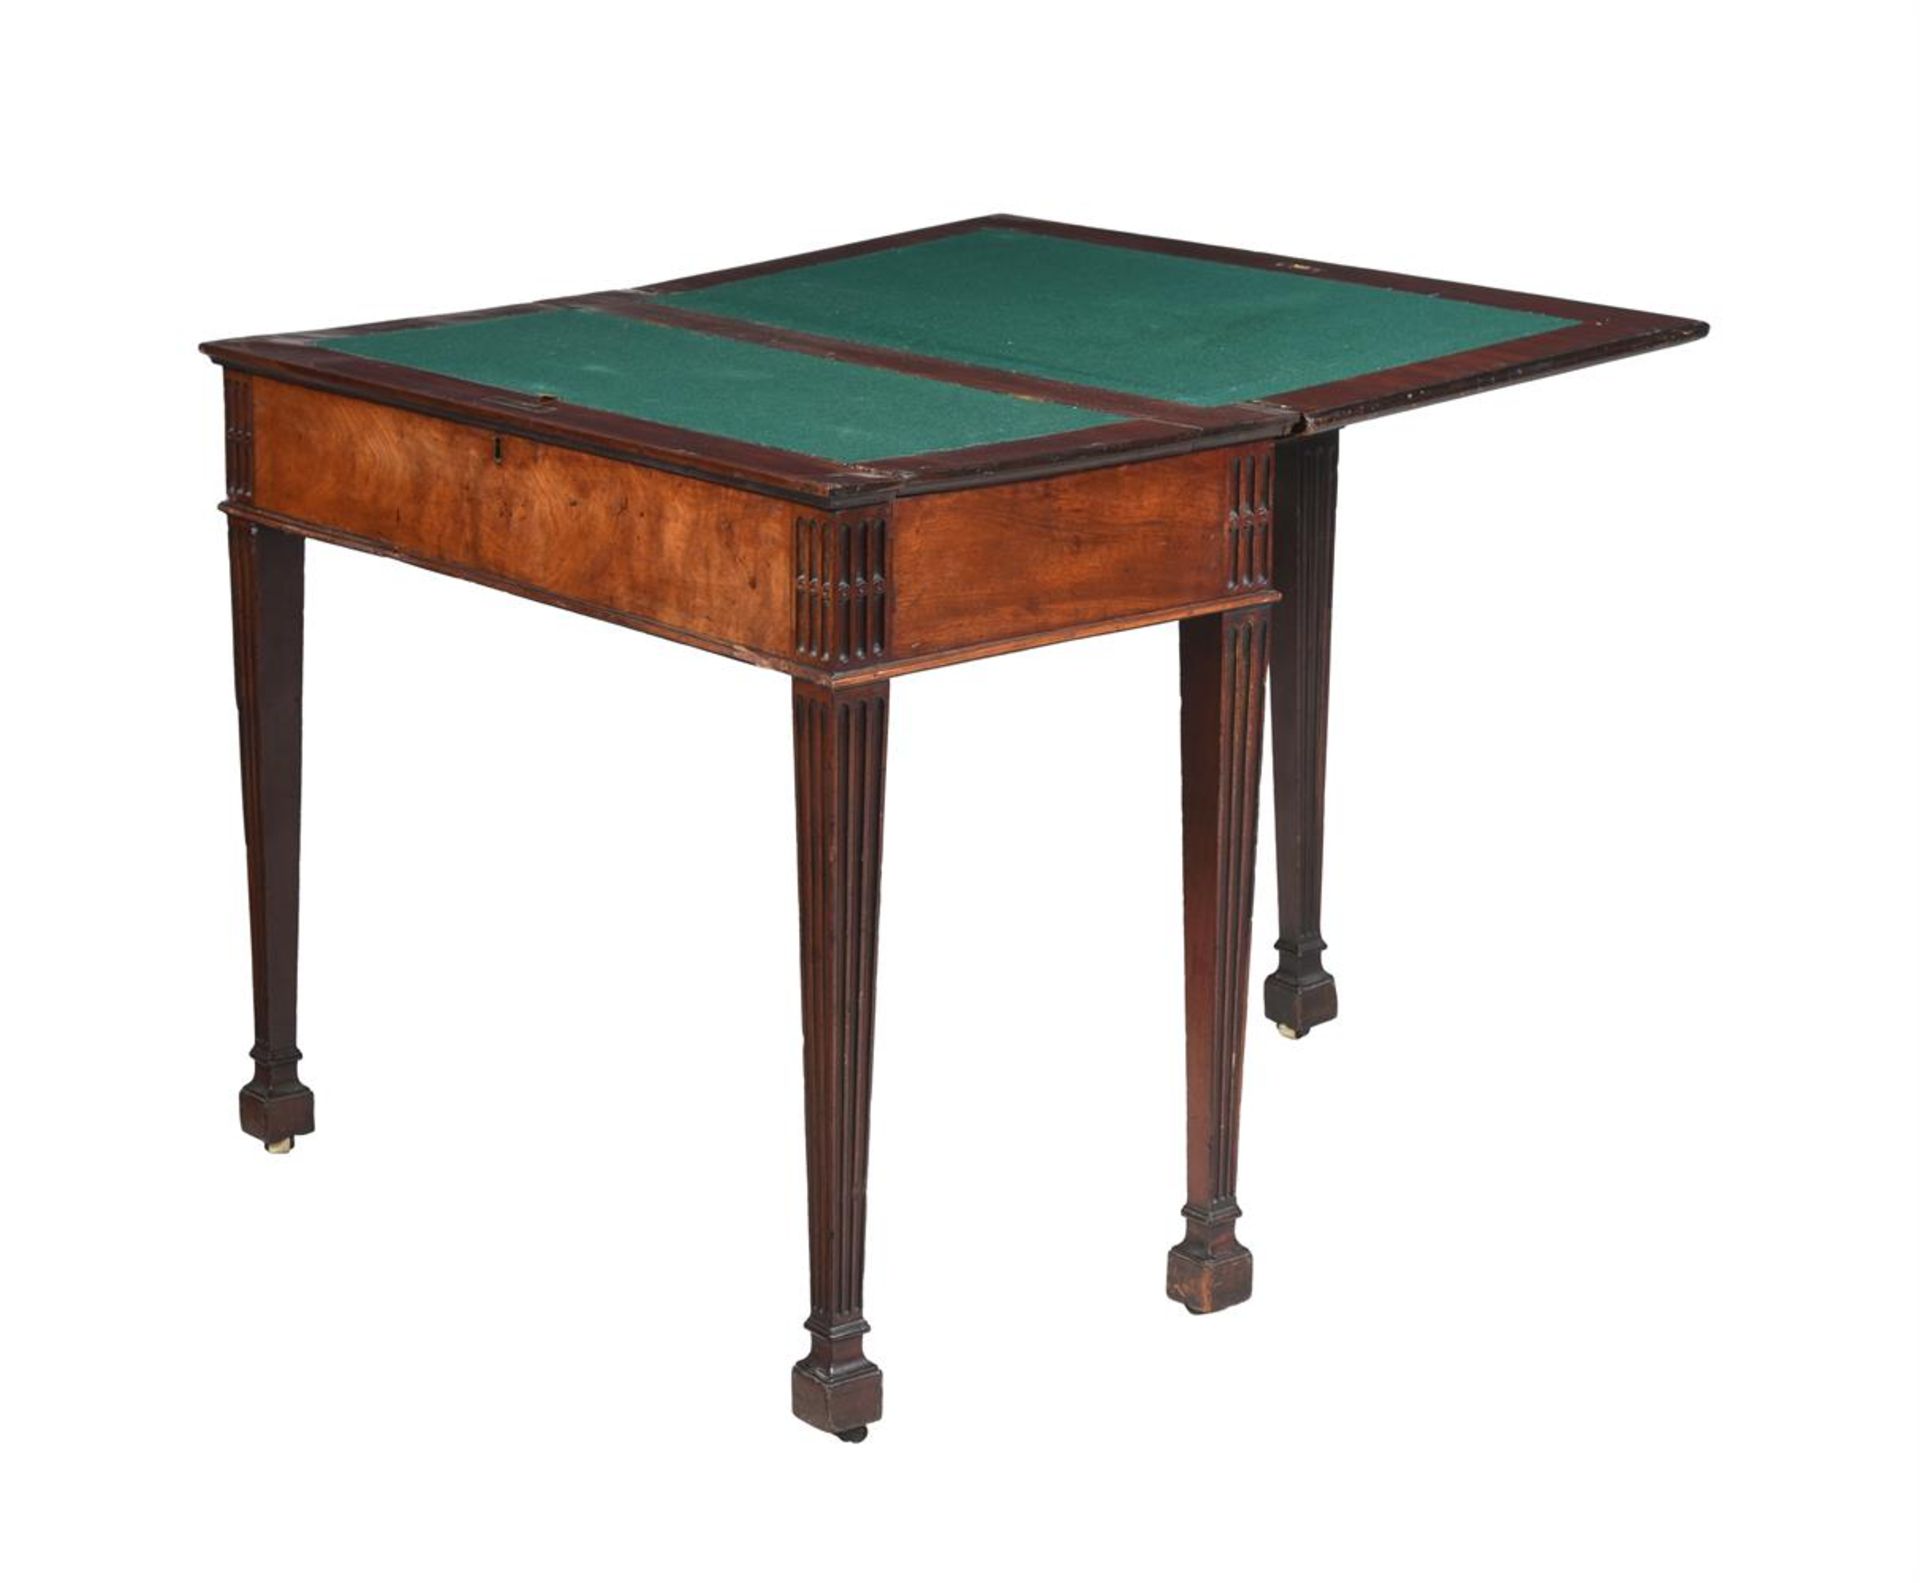 A GEORGE III MAHOGANY FOLDING GAMES TABLE, LATE 18TH CENTURY - Image 2 of 2